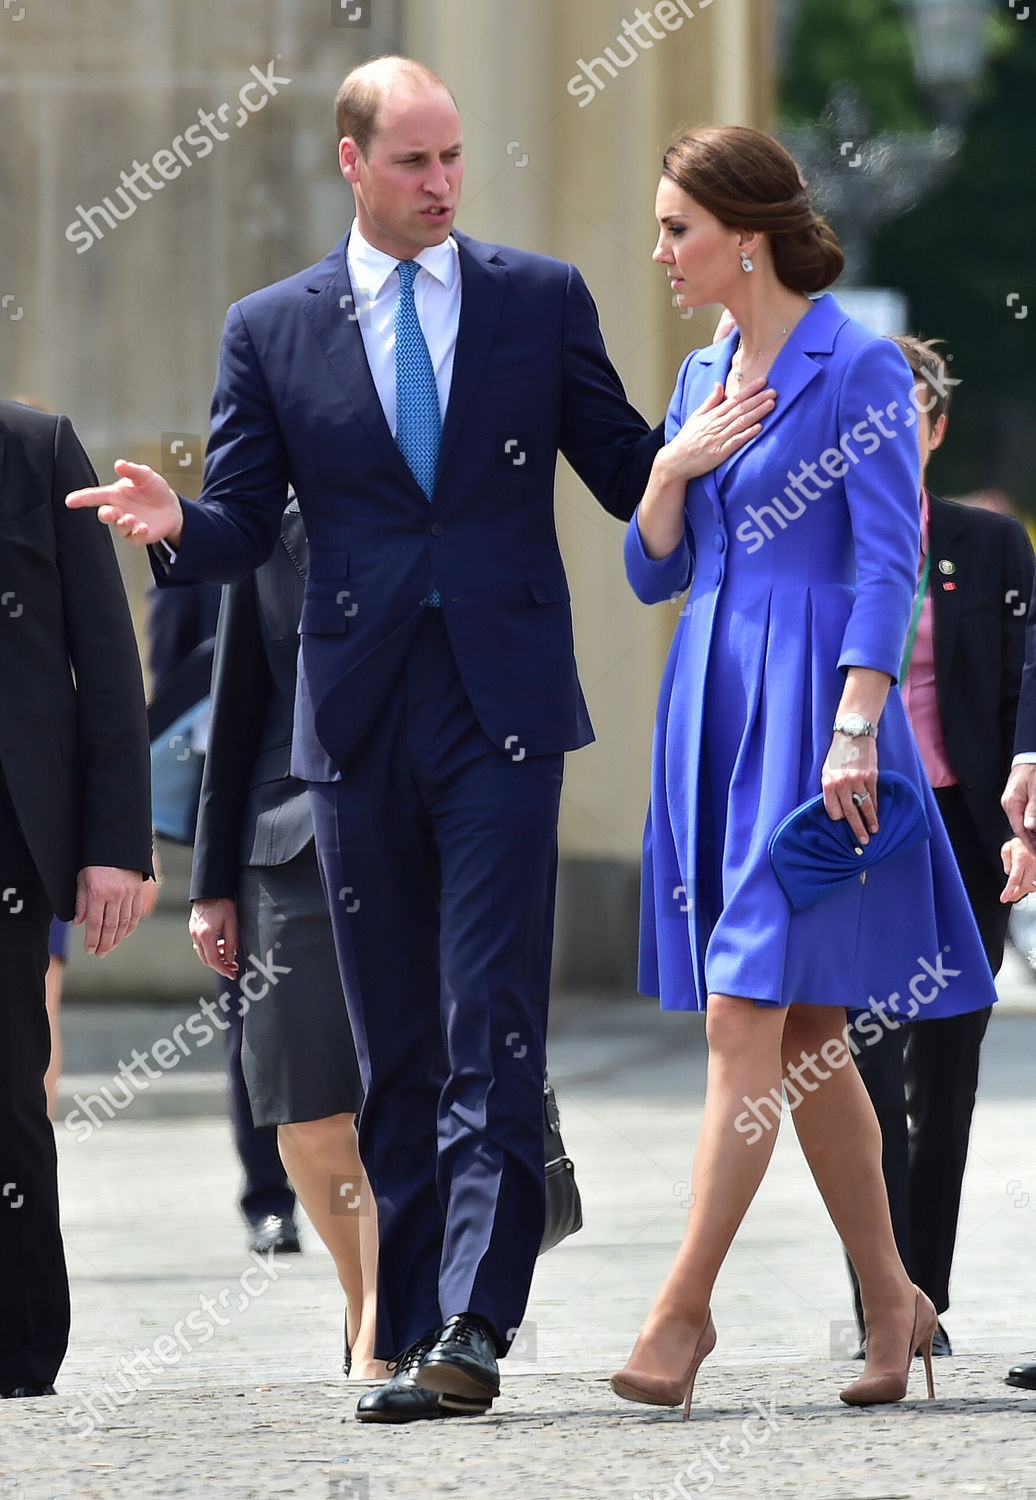 prince-william-and-catherine-duchess-of-cambridge-visit-to-germany-19-jul-2017-shutterstock-editorial-9008594d.jpg